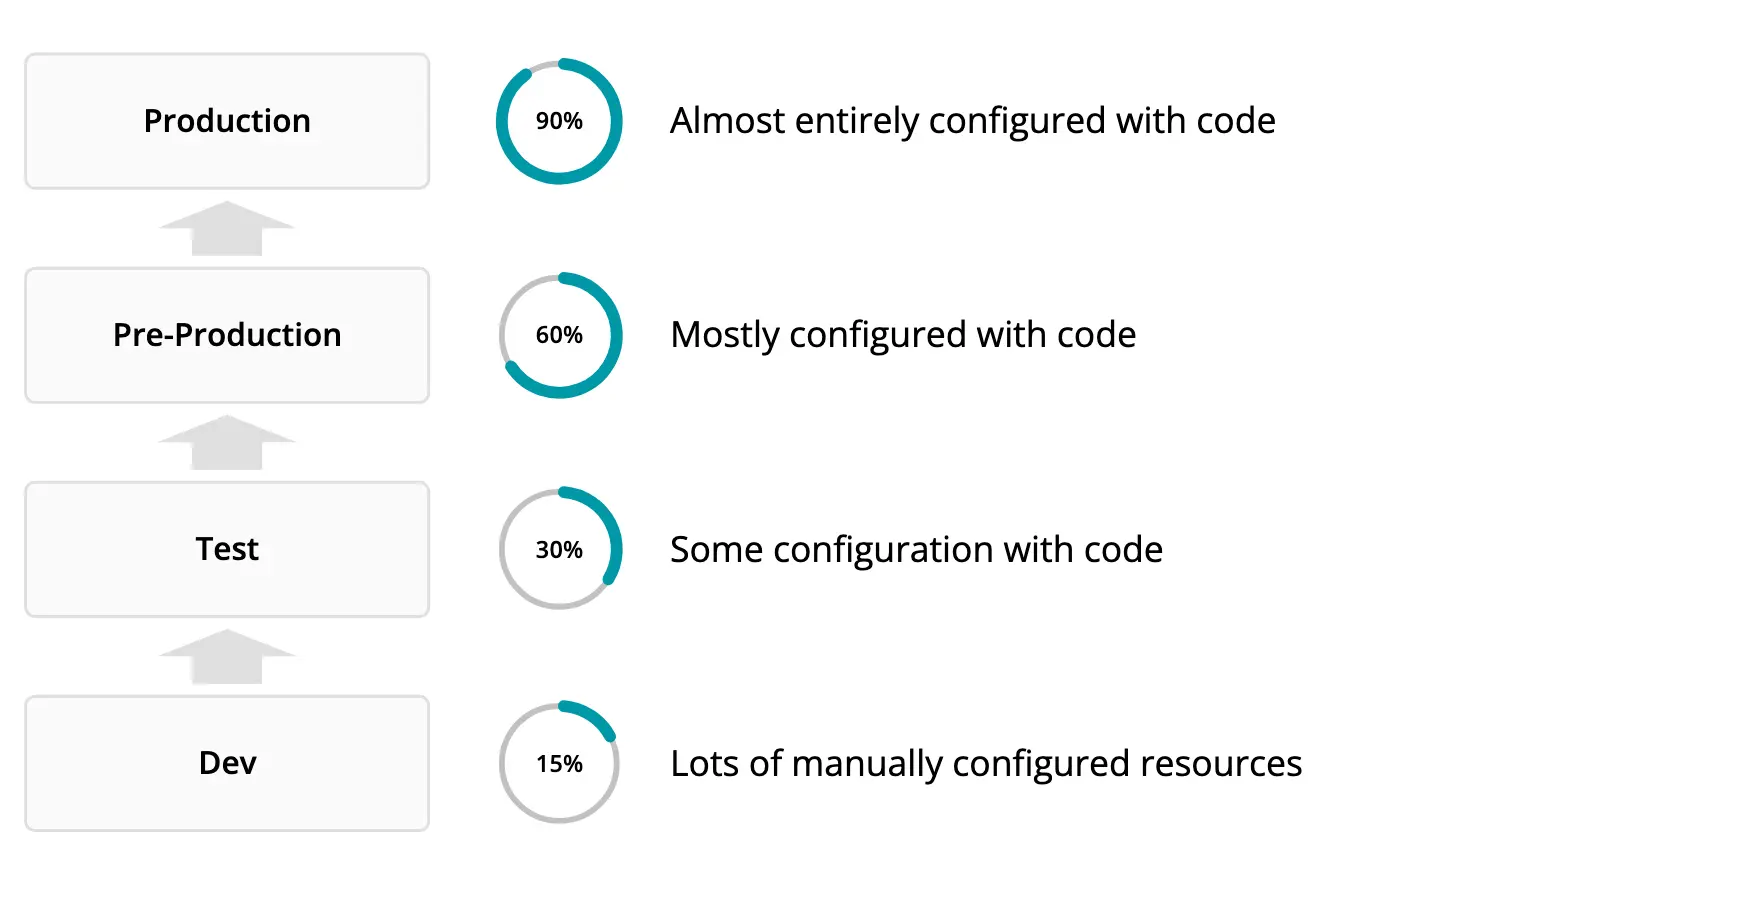 Percentage of code driven configuration increases with environment maturity